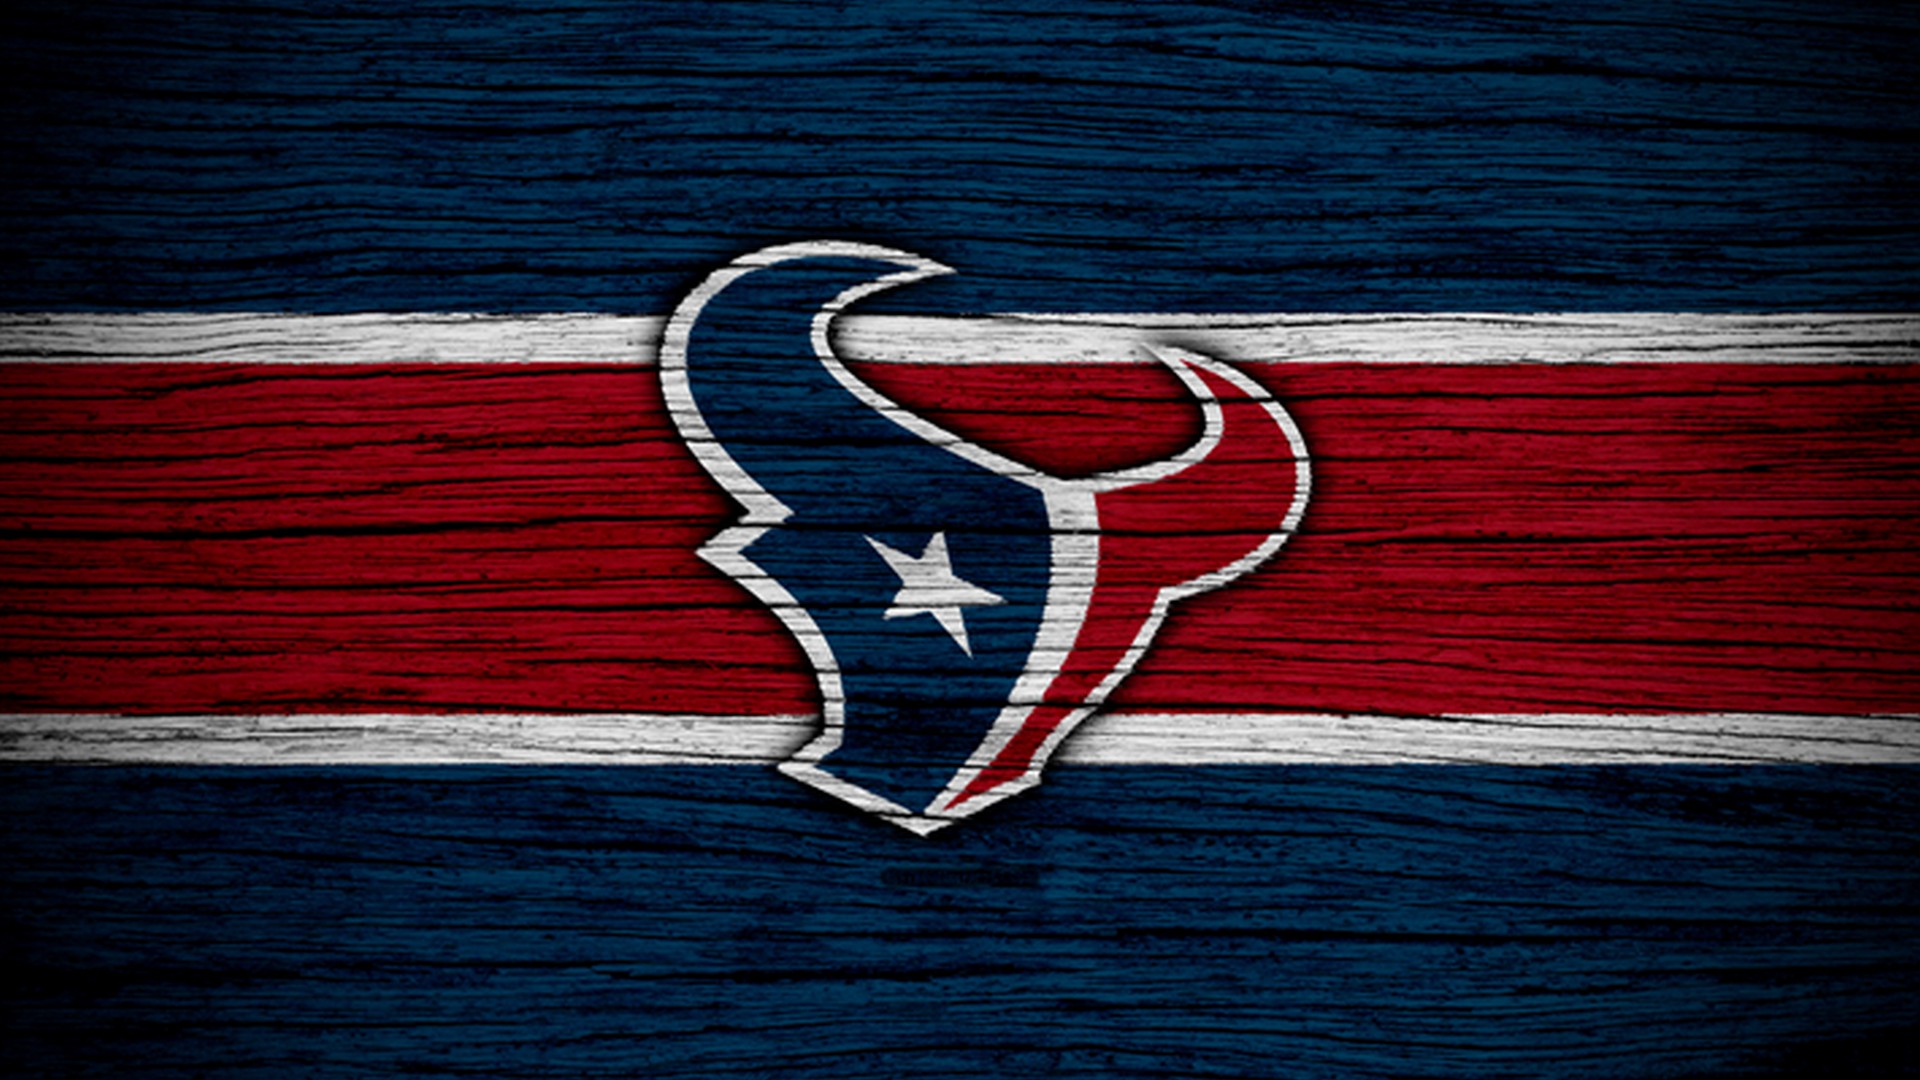 Houston Texans NFL Desktop Wallpaper with resolution 1920x1080 pixel. You can make this wallpaper for your Mac or Windows Desktop Background, iPhone, Android or Tablet and another Smartphone device